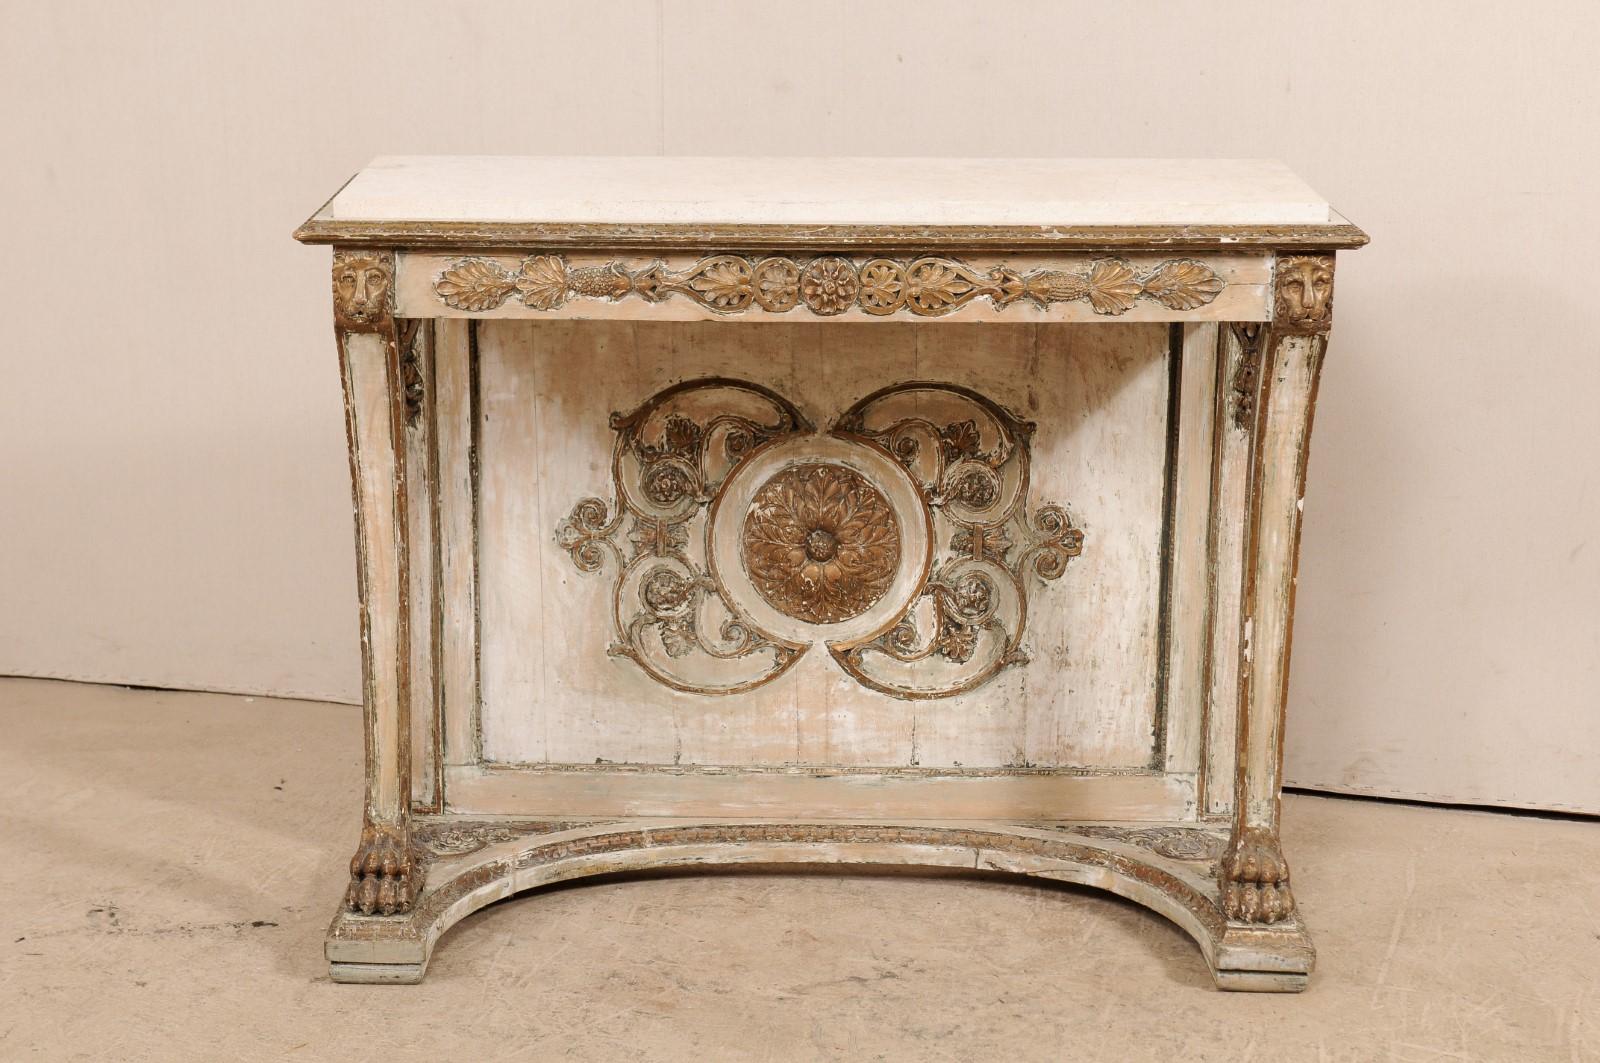 An Italian neoclassical parcel-gilt and white painted console table, circa 1830. This Fine antique neoclassical style table from Italy features a rectangular-shaped honed stone top, which rests within a carved lip, atop a skirt with richly carved